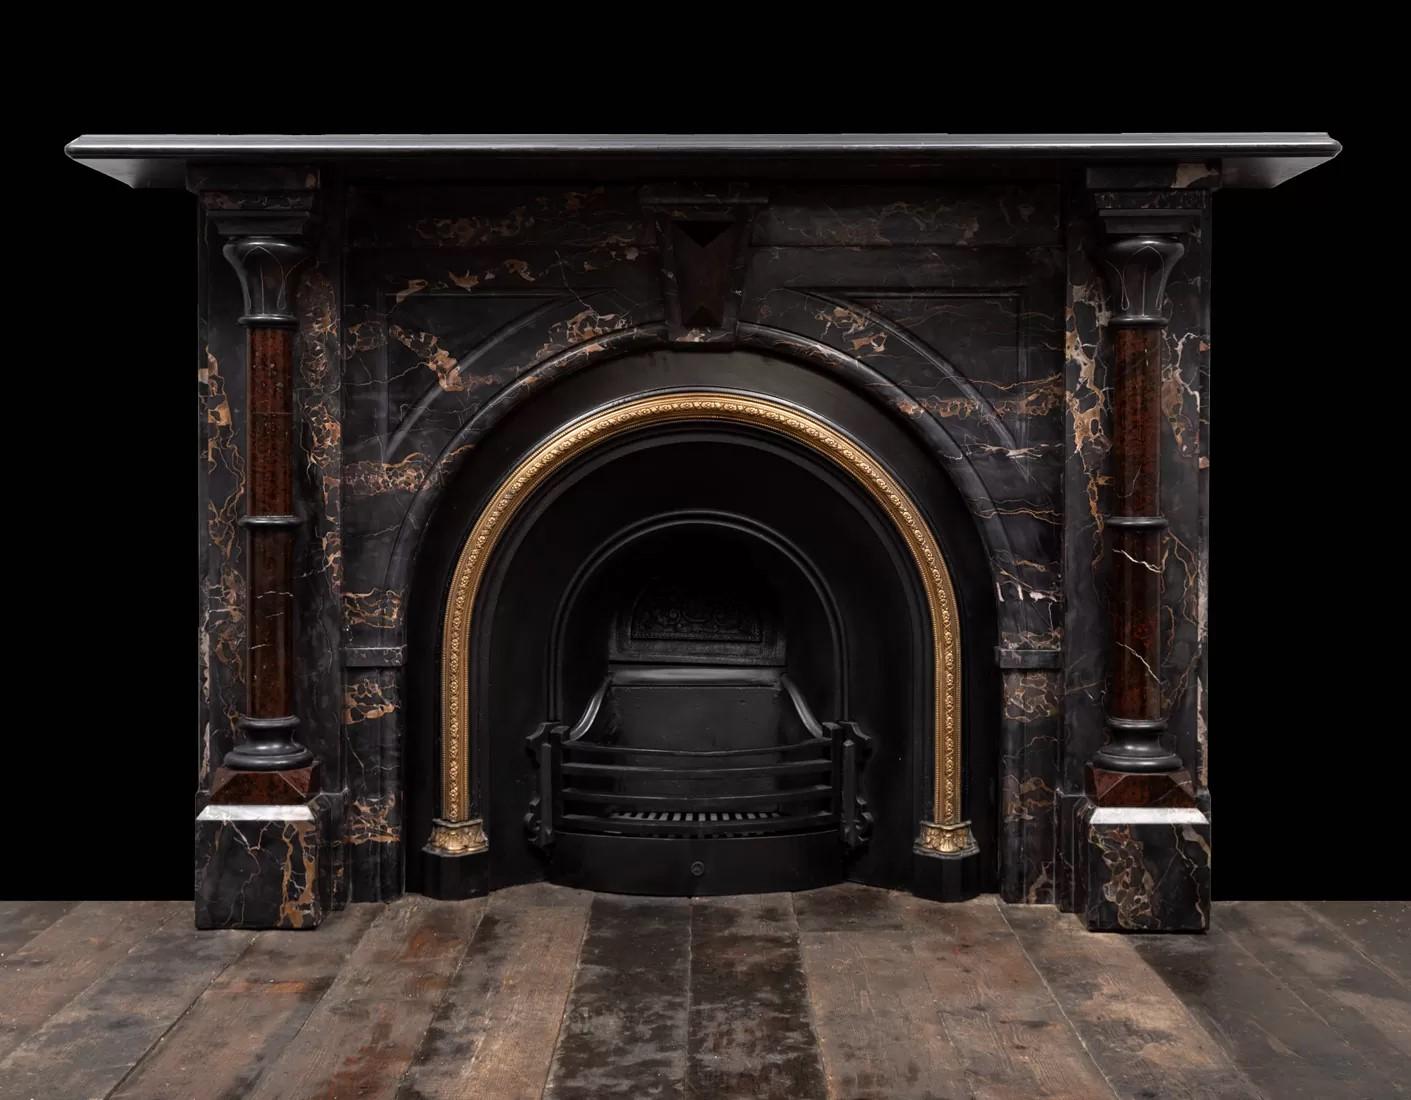 A grand antique Victorian marble fireplace made from Nero Portoro, Mazy Black and Serpentine marbles.
The richly coloured Portoro marble body is adorned with Serpentine pillars, Serpentine centre keystone and black marble lotus leaf capitals,